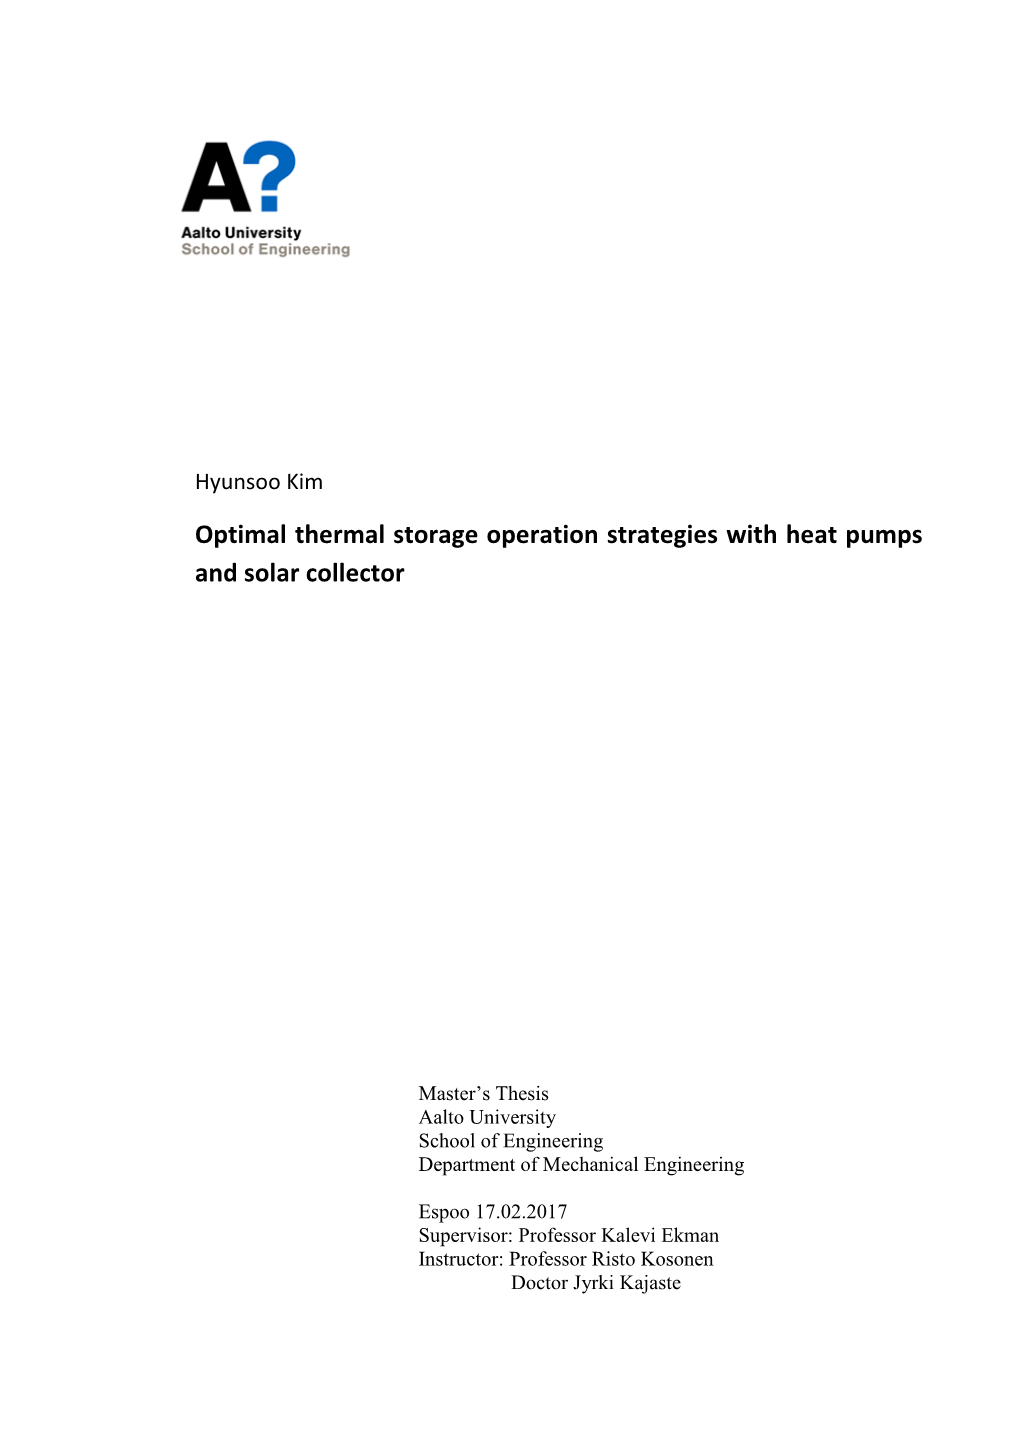 Optimal Thermal Storage Operation Strategies with Heat Pumps and Solar Collector